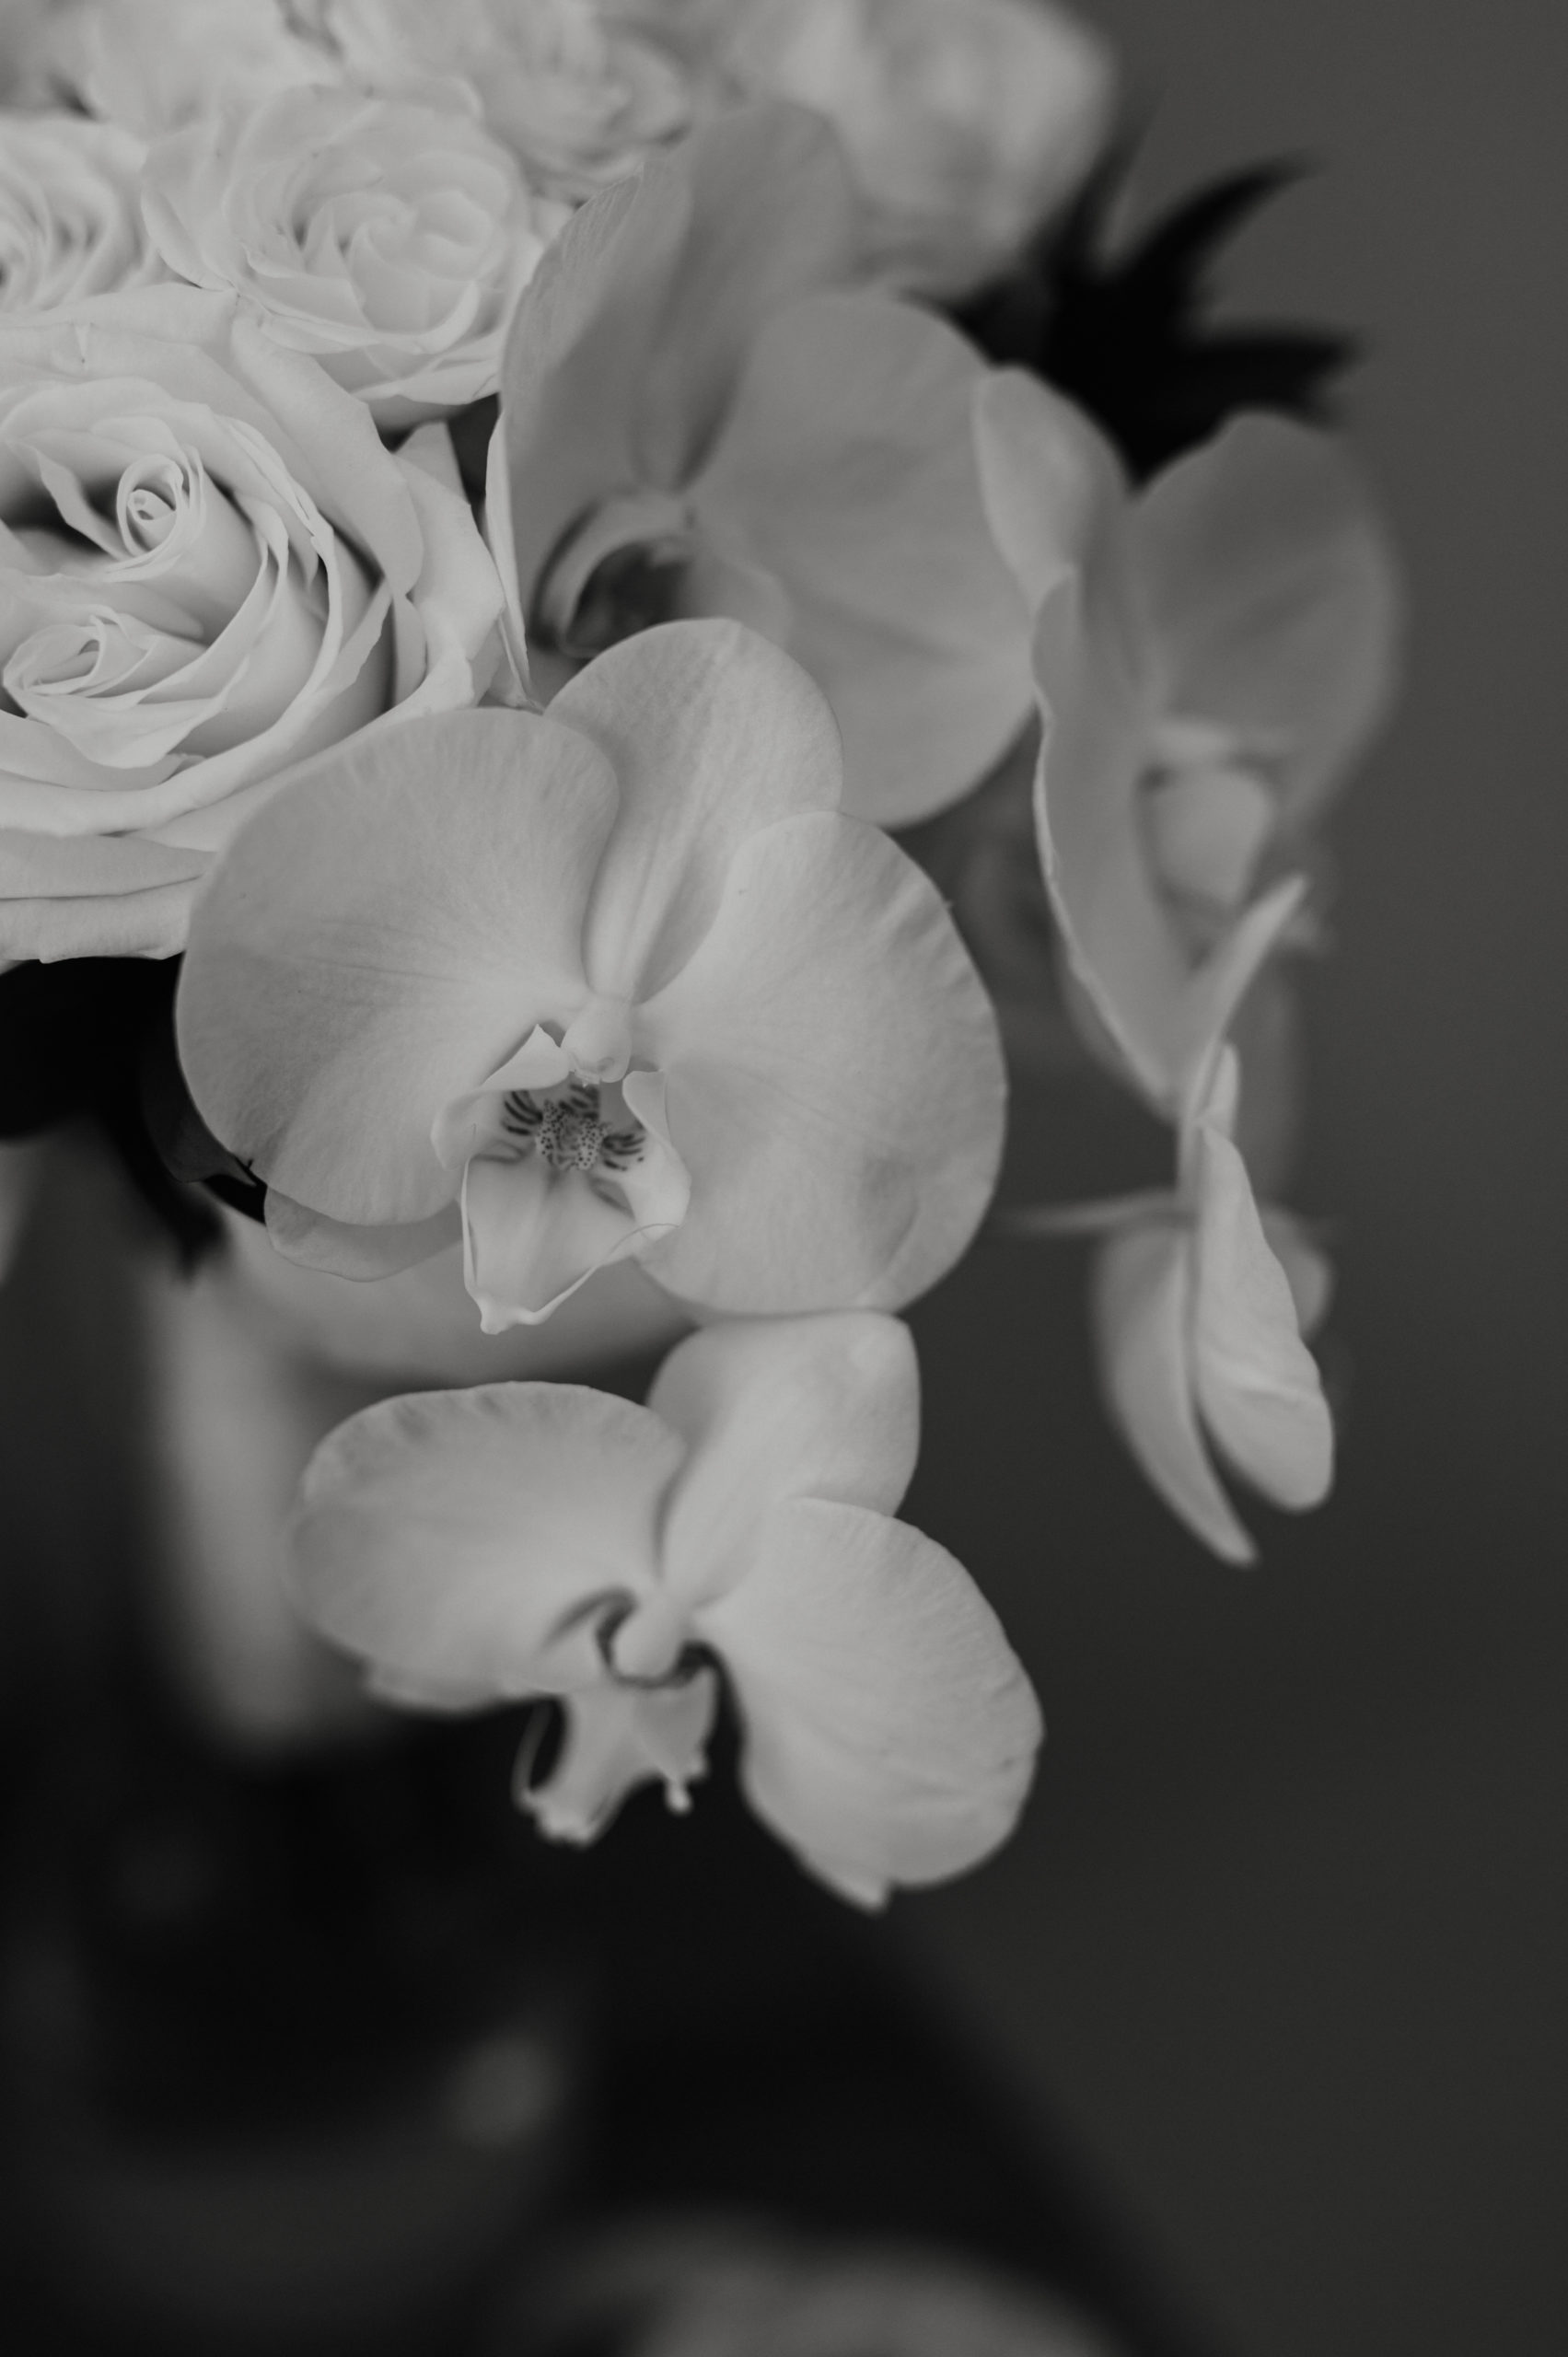 Orchids as bridal flowers
